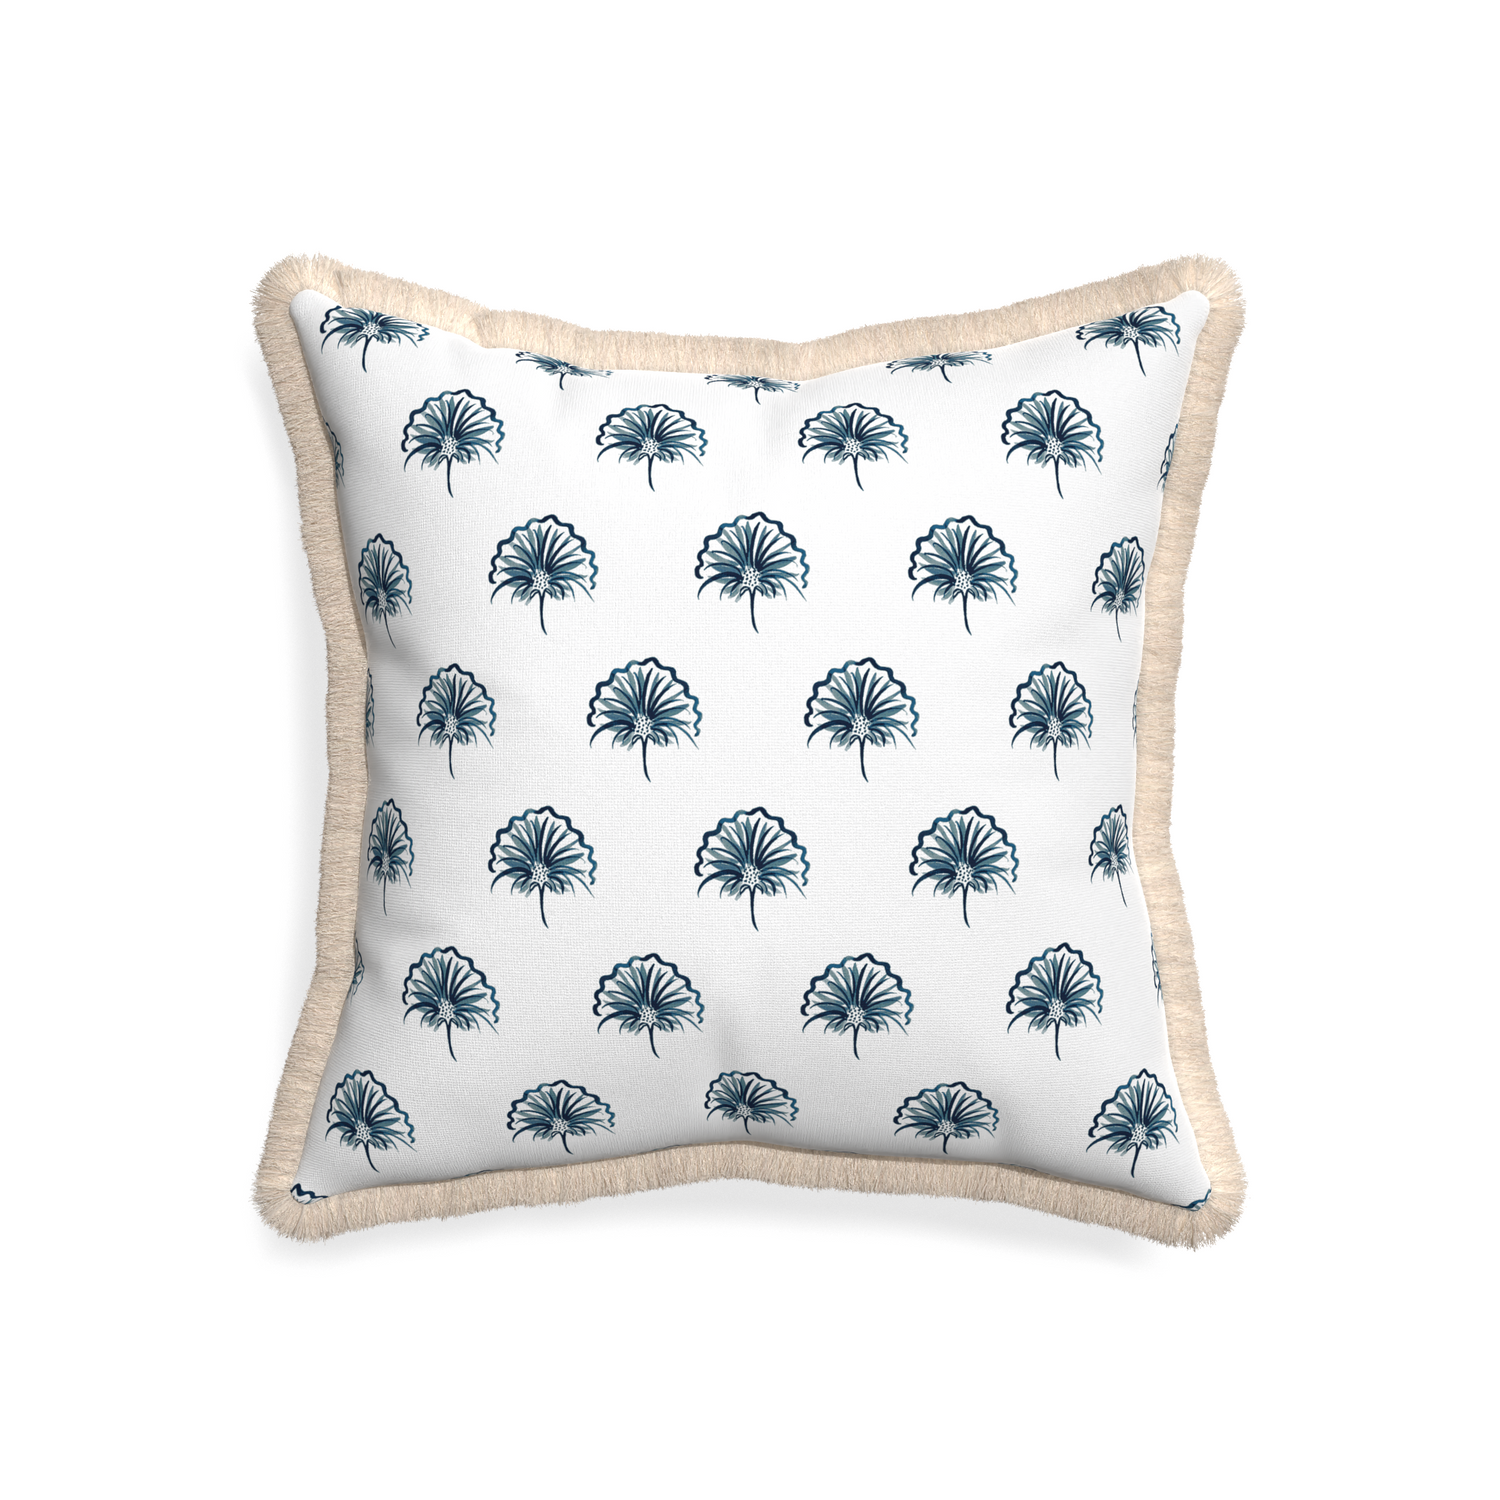 20-square penelope midnight custom floral navypillow with cream fringe on white background